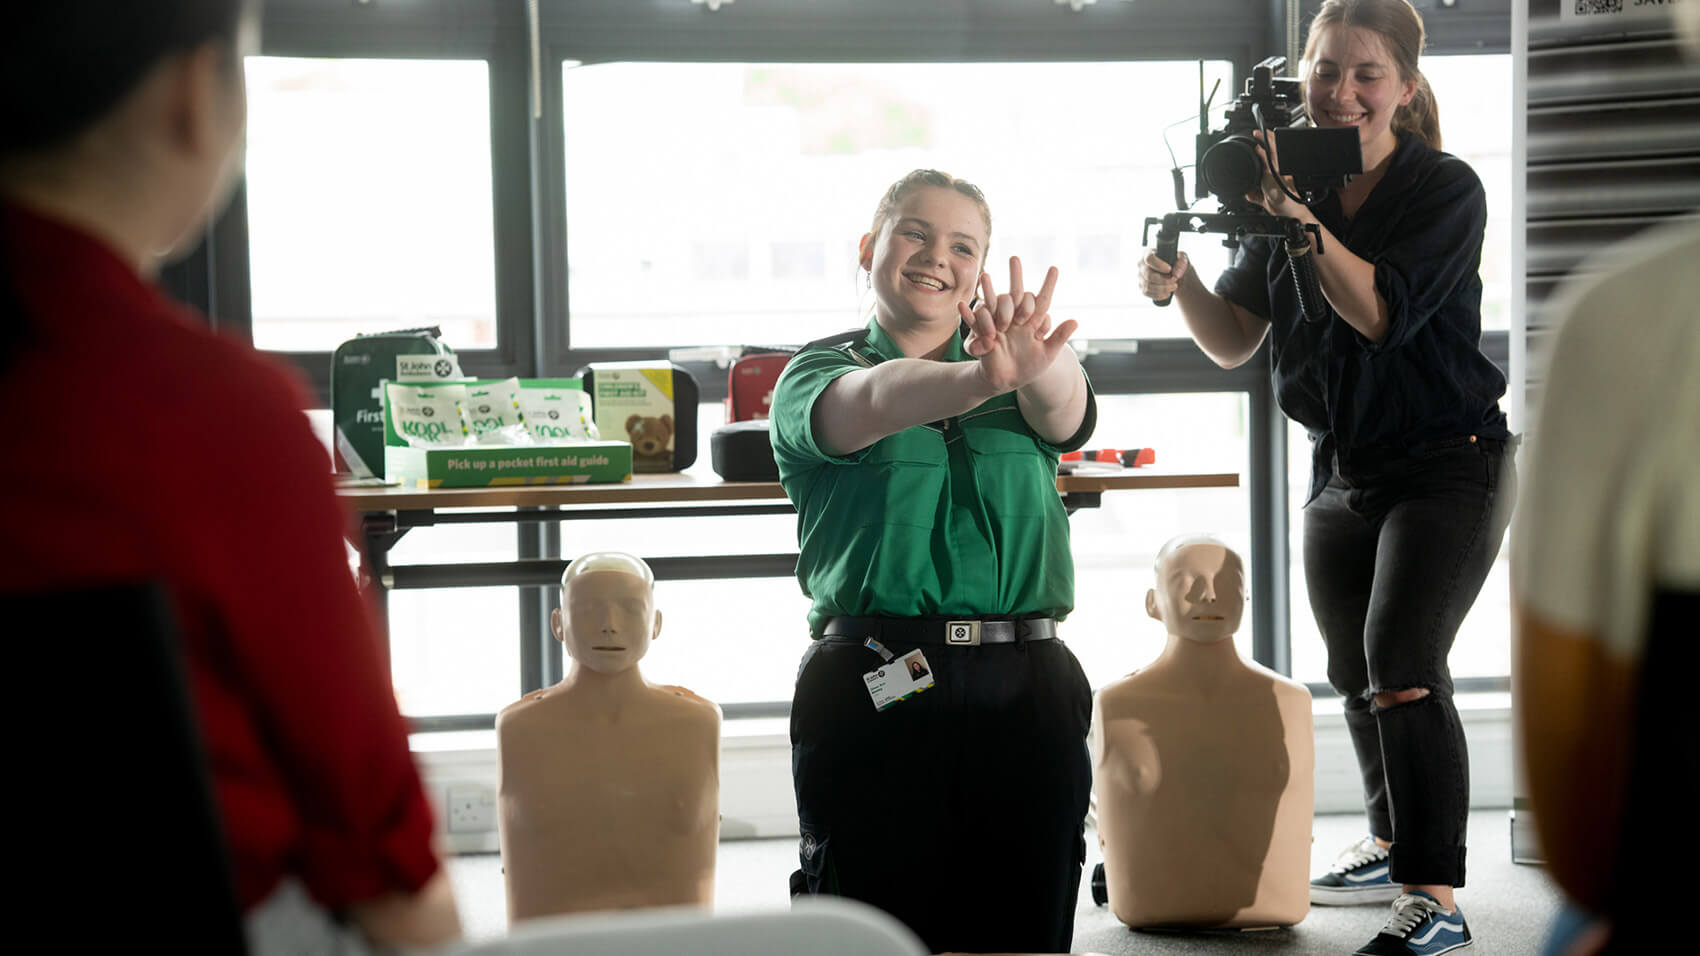 A St John Ambulance volunteer demonstrating first aid techniques while being filmed by a Rise Media camerawoman